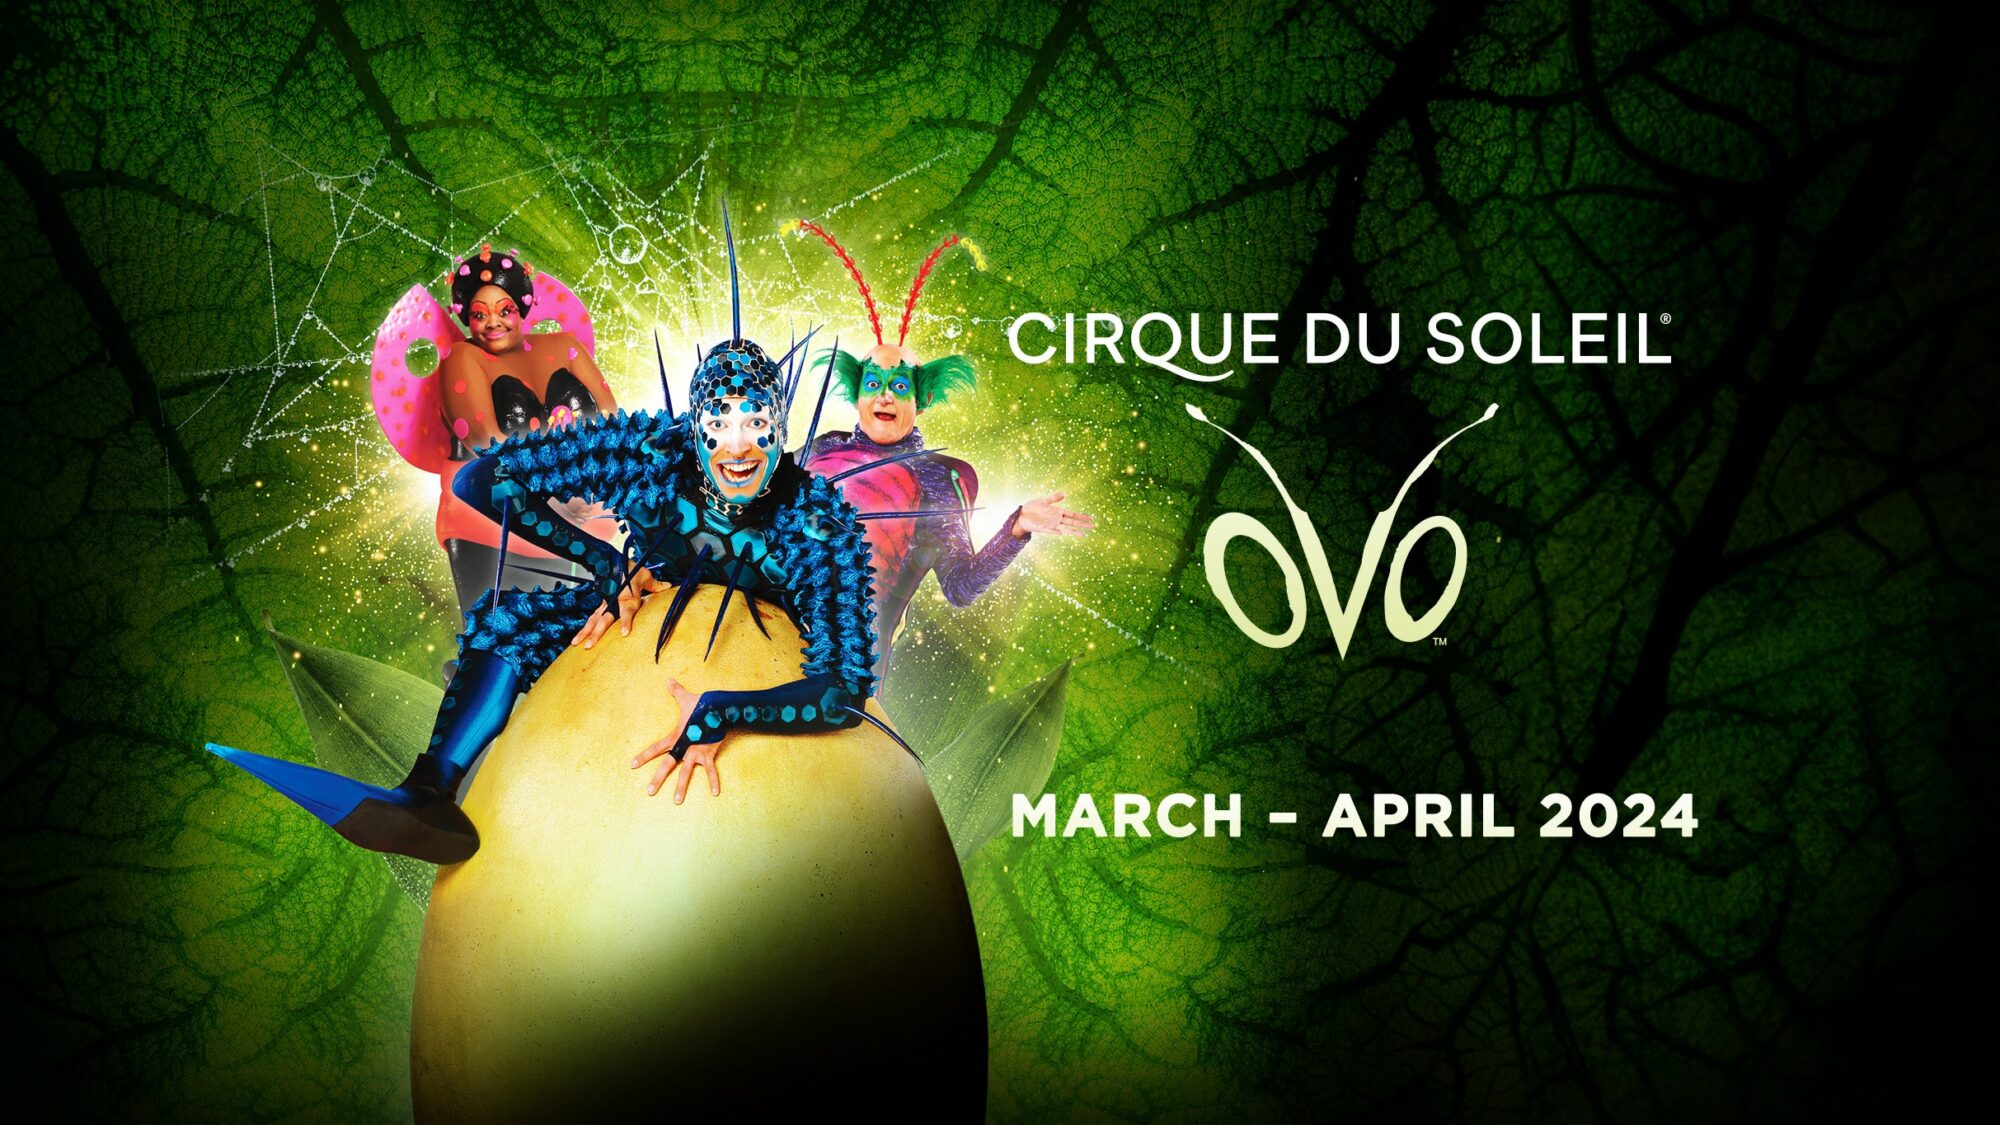 Image name Cirque Du Soleil Ovo at First Direct Arena Leeds the 19 image from the post Cirque du Soleil : OVO - Meet & Greet Package at First Direct Arena, Leeds in Yorkshire.com.